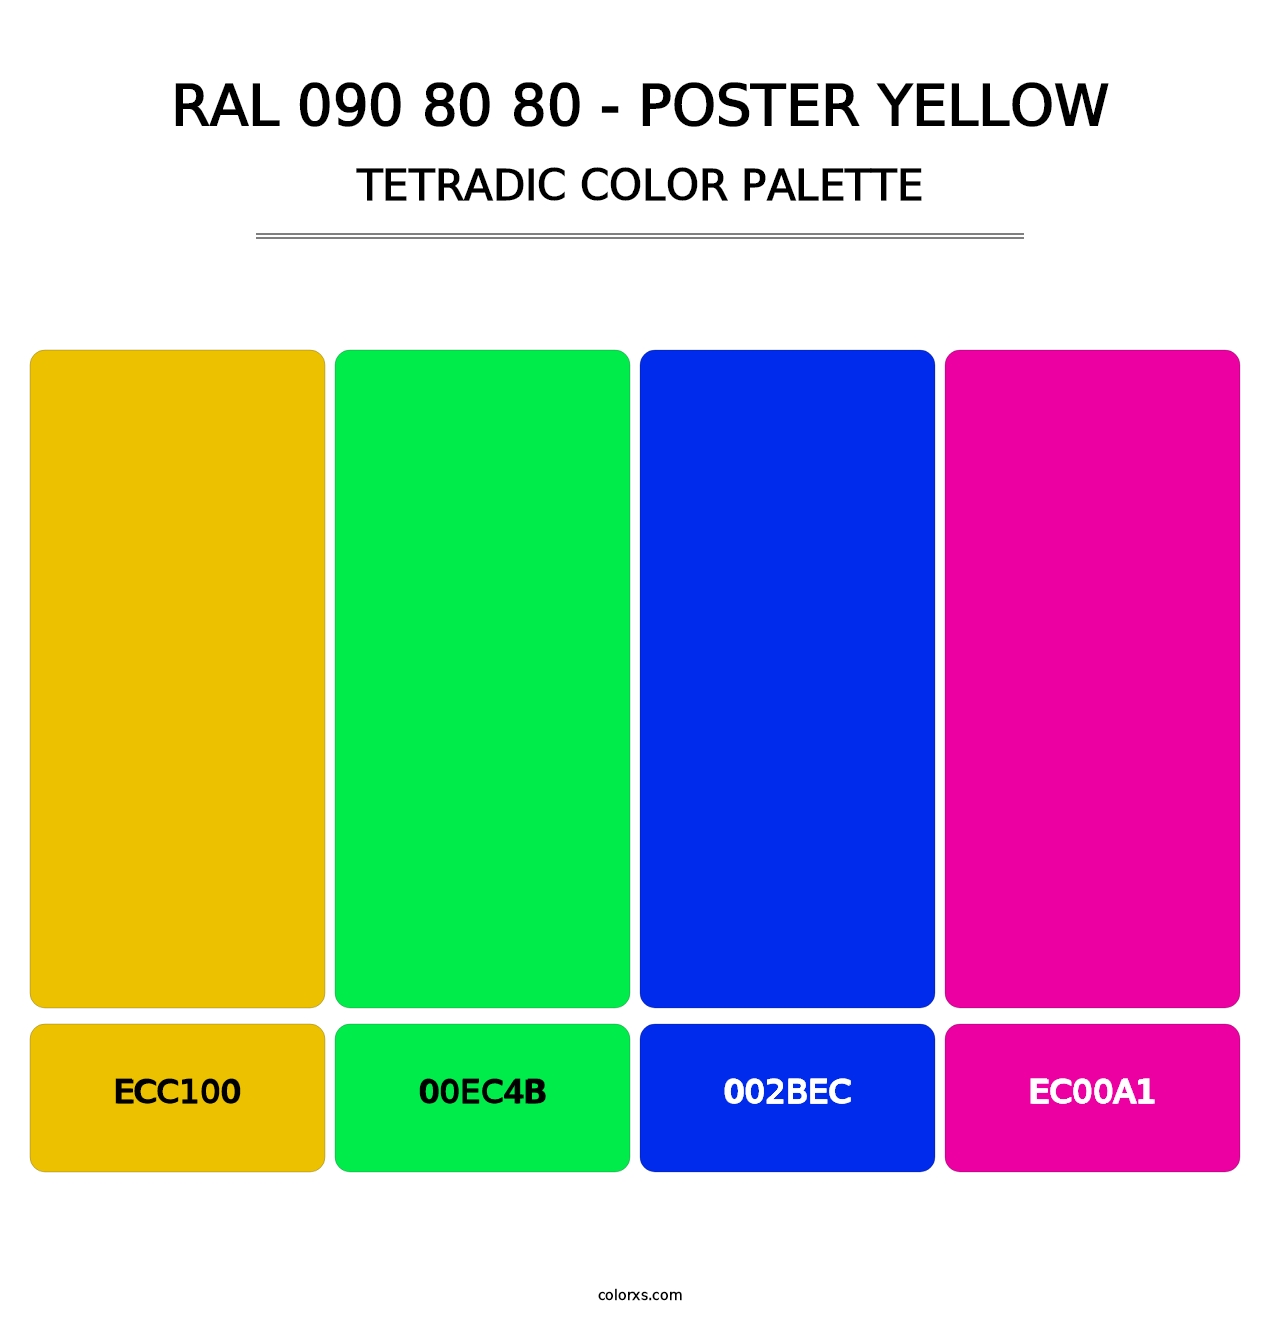 RAL 090 80 80 - Poster Yellow - Tetradic Color Palette